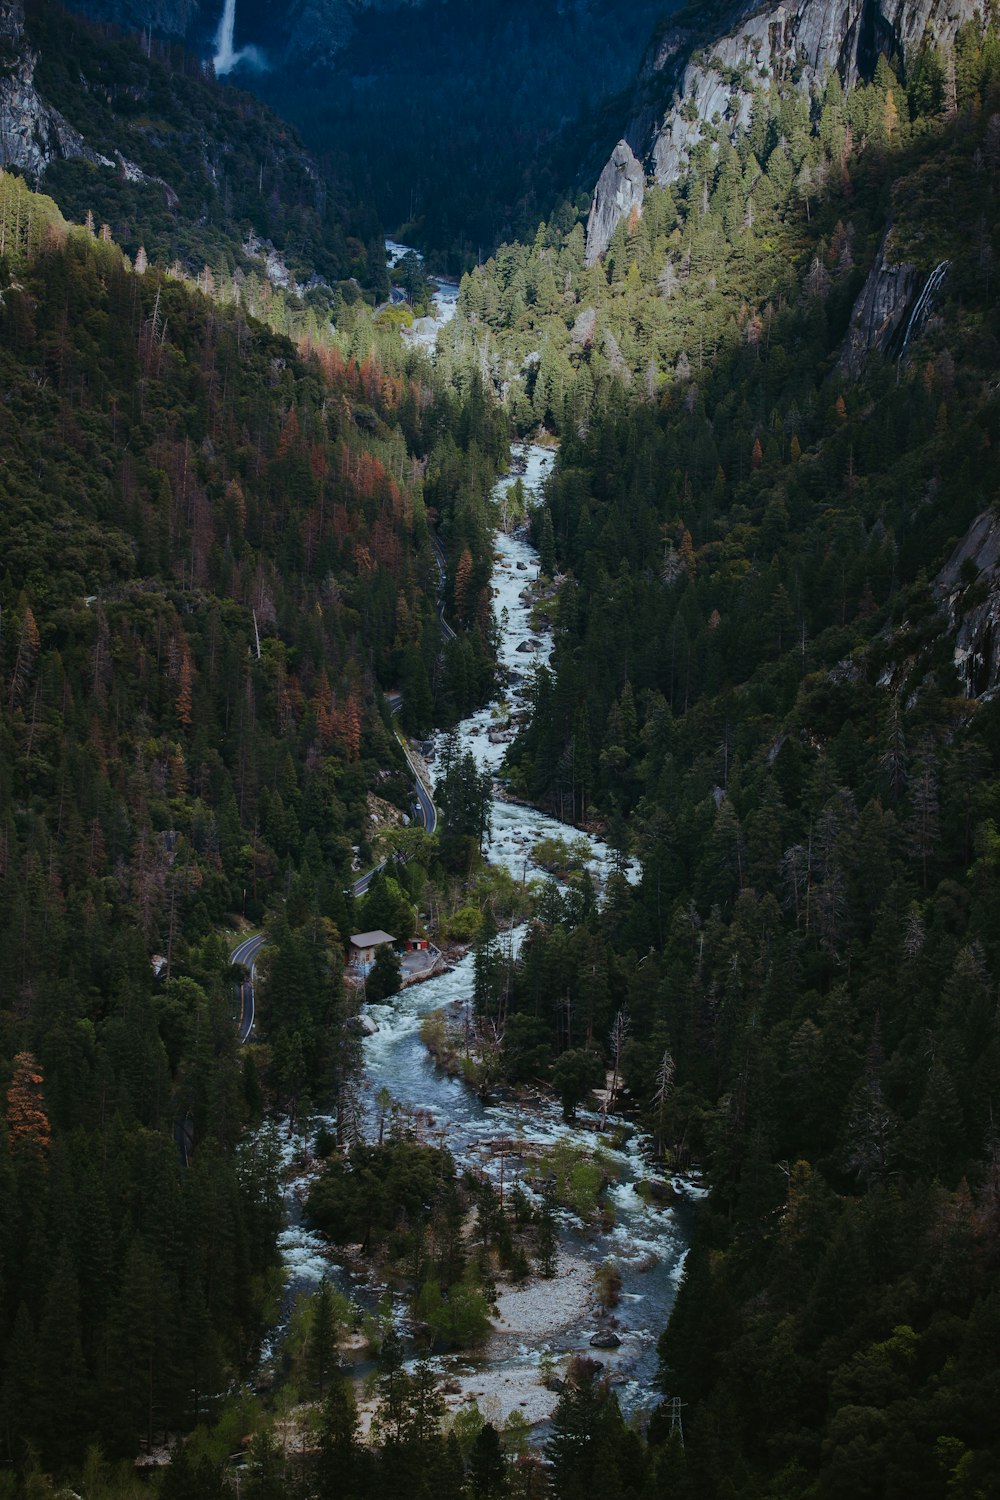 creek in between mountains covered with pine trees at daytime